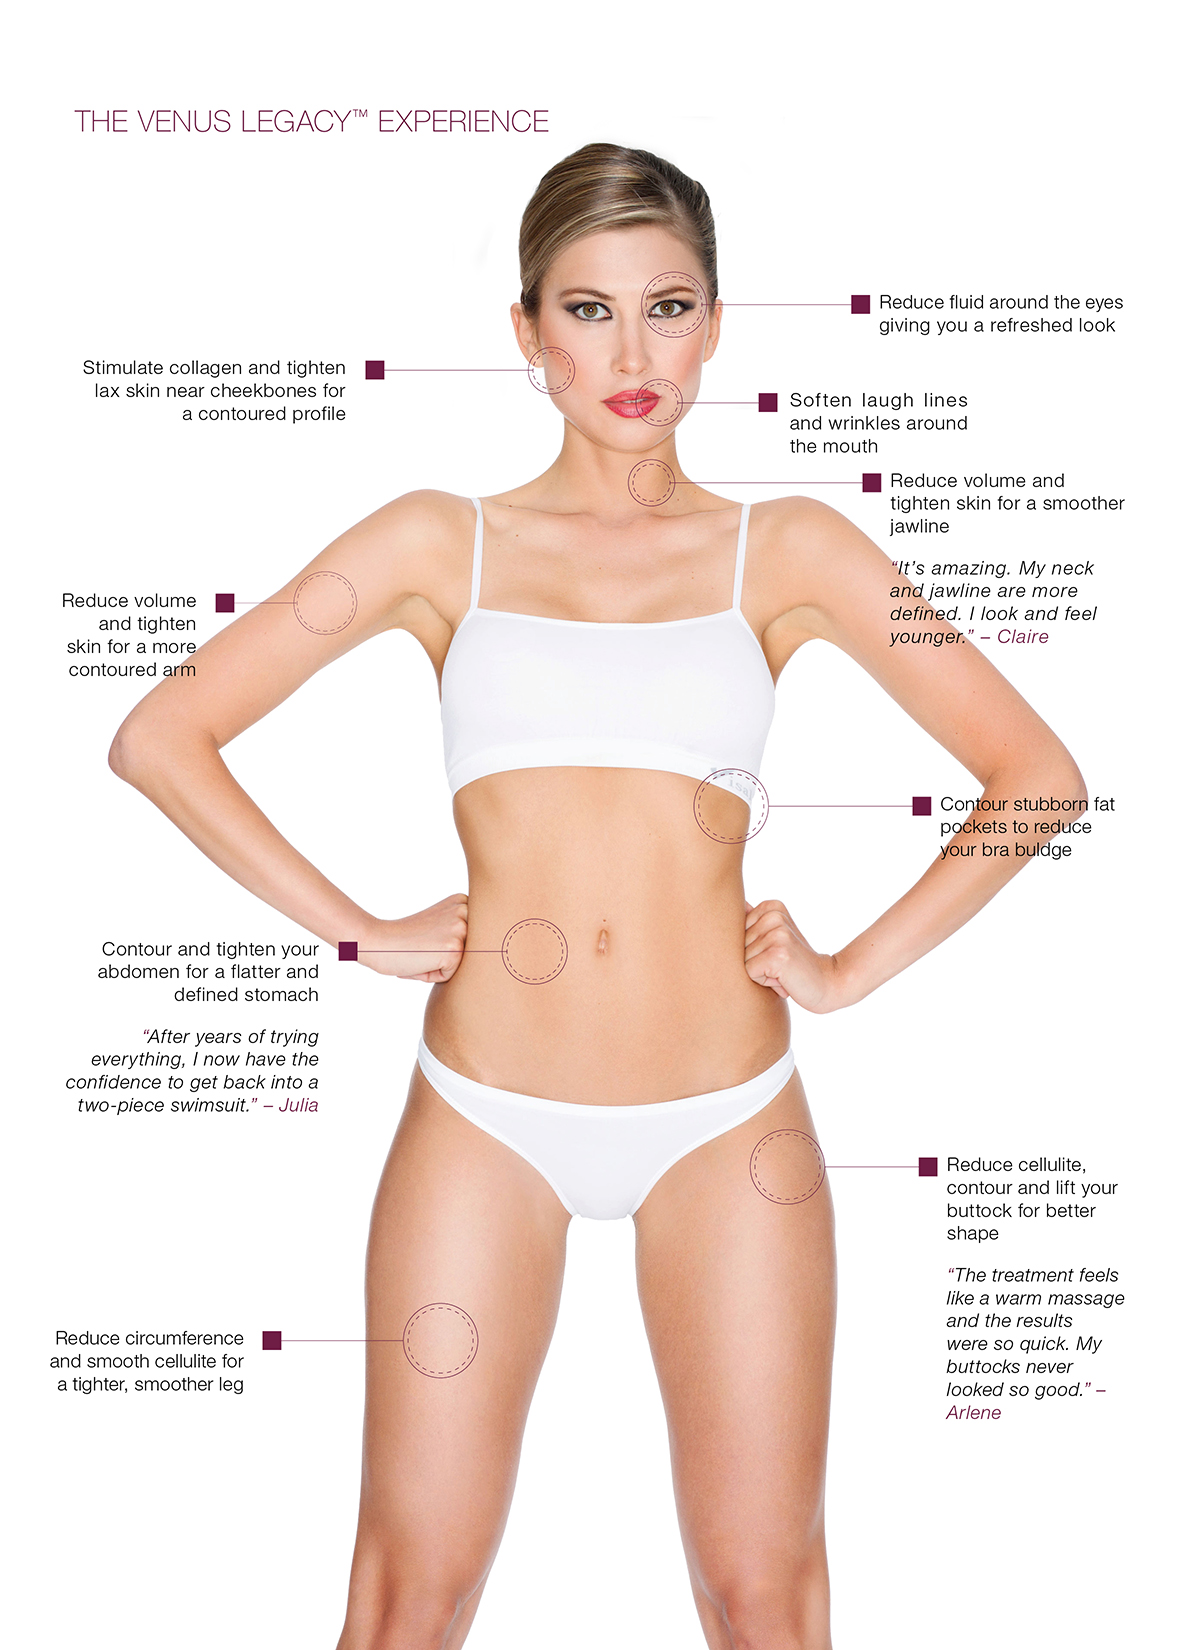 So, what is body contouring anyways? Well… Body contouring is a